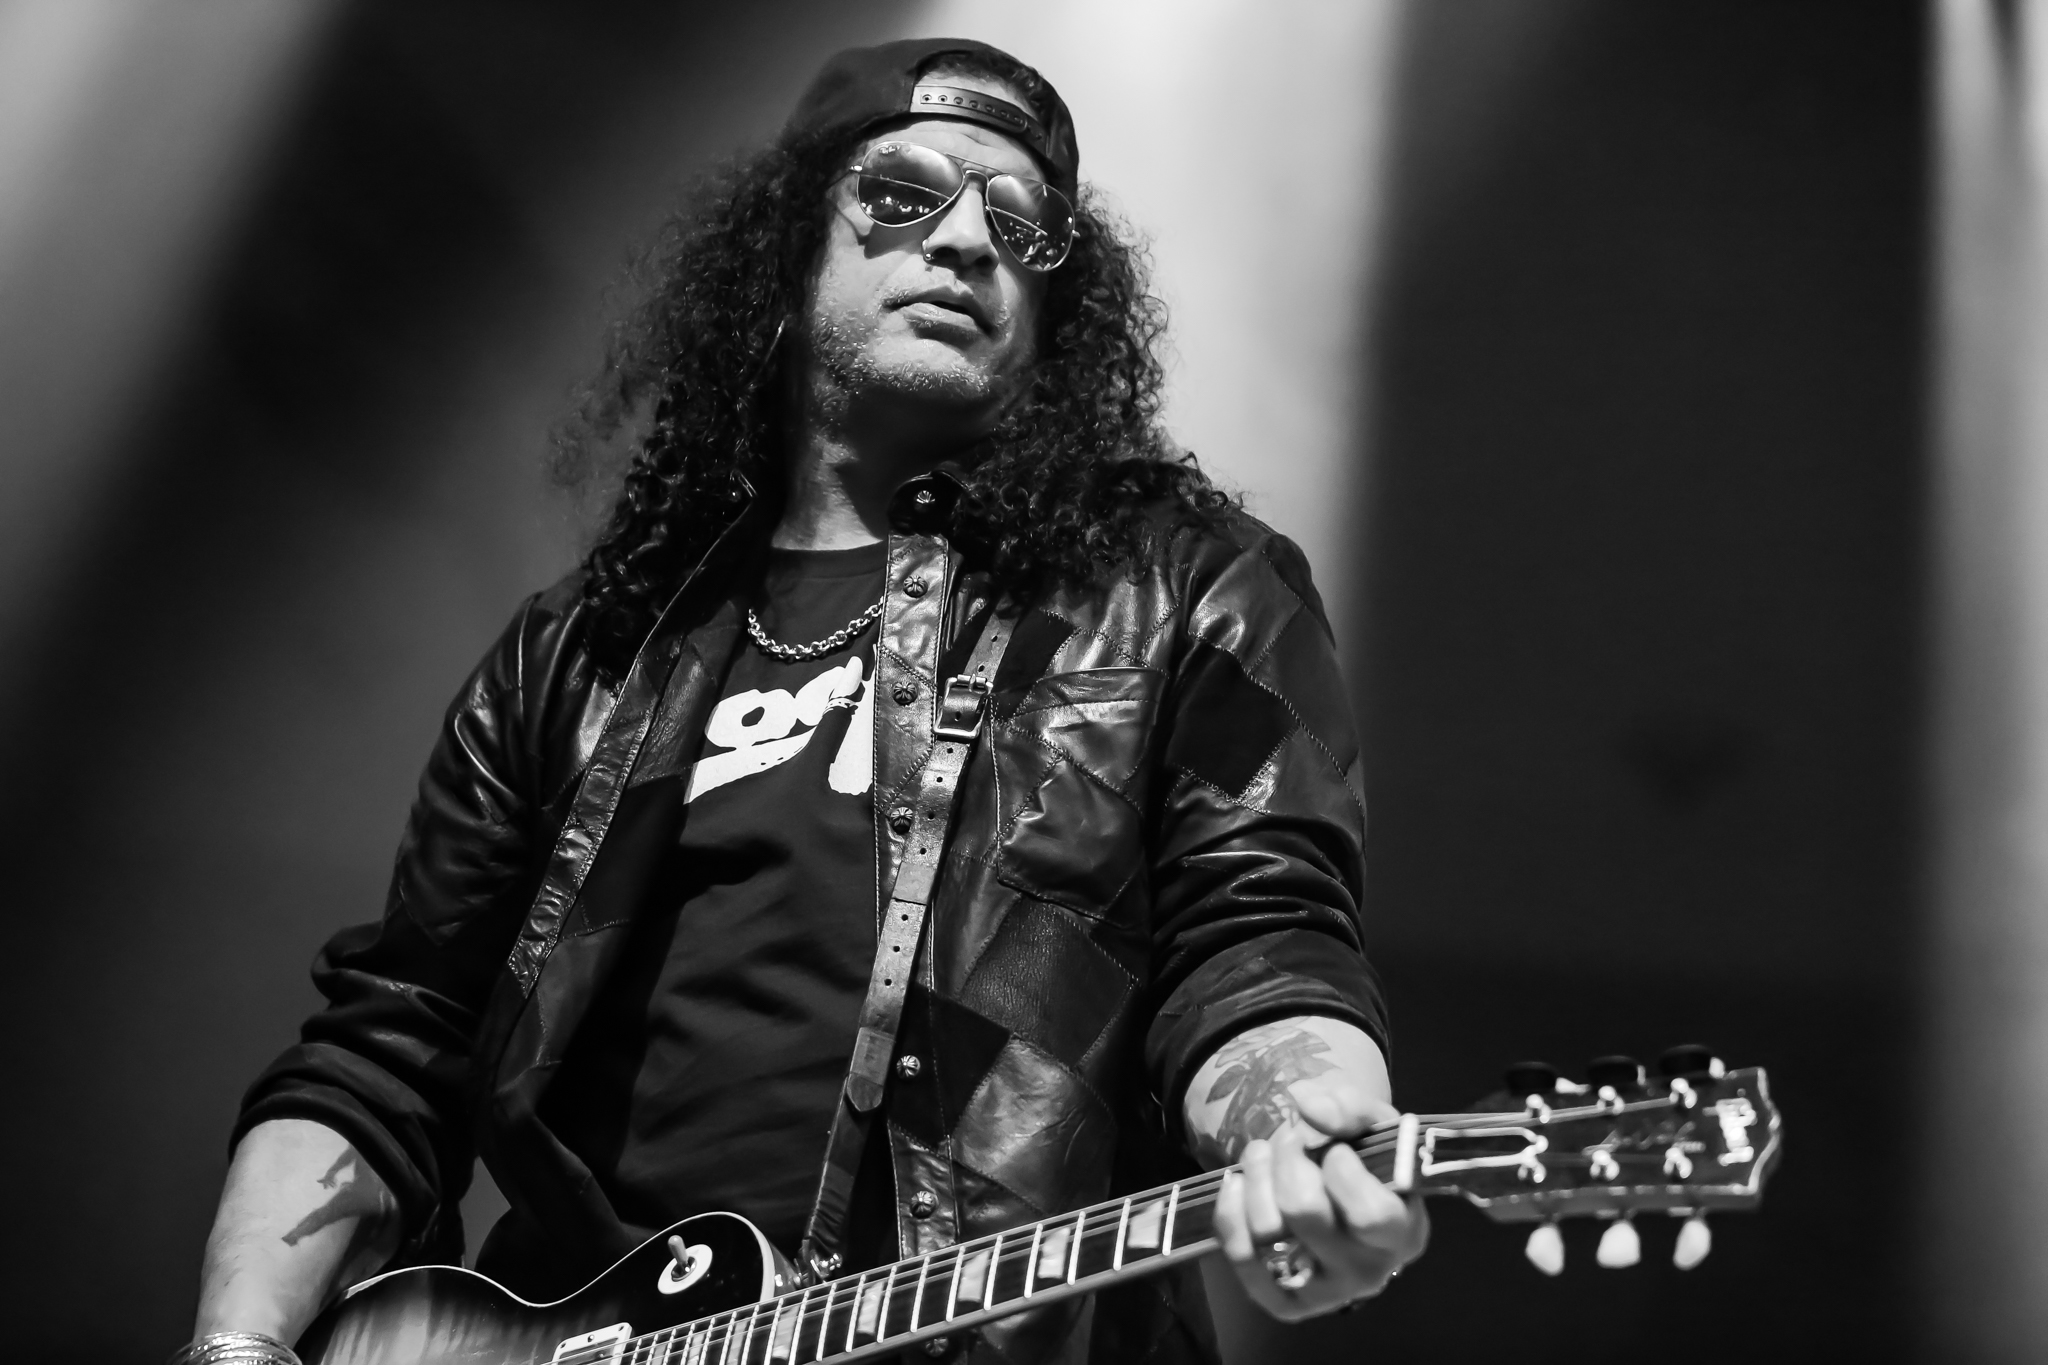 Slash is known as one of the best guitarists in the World.  